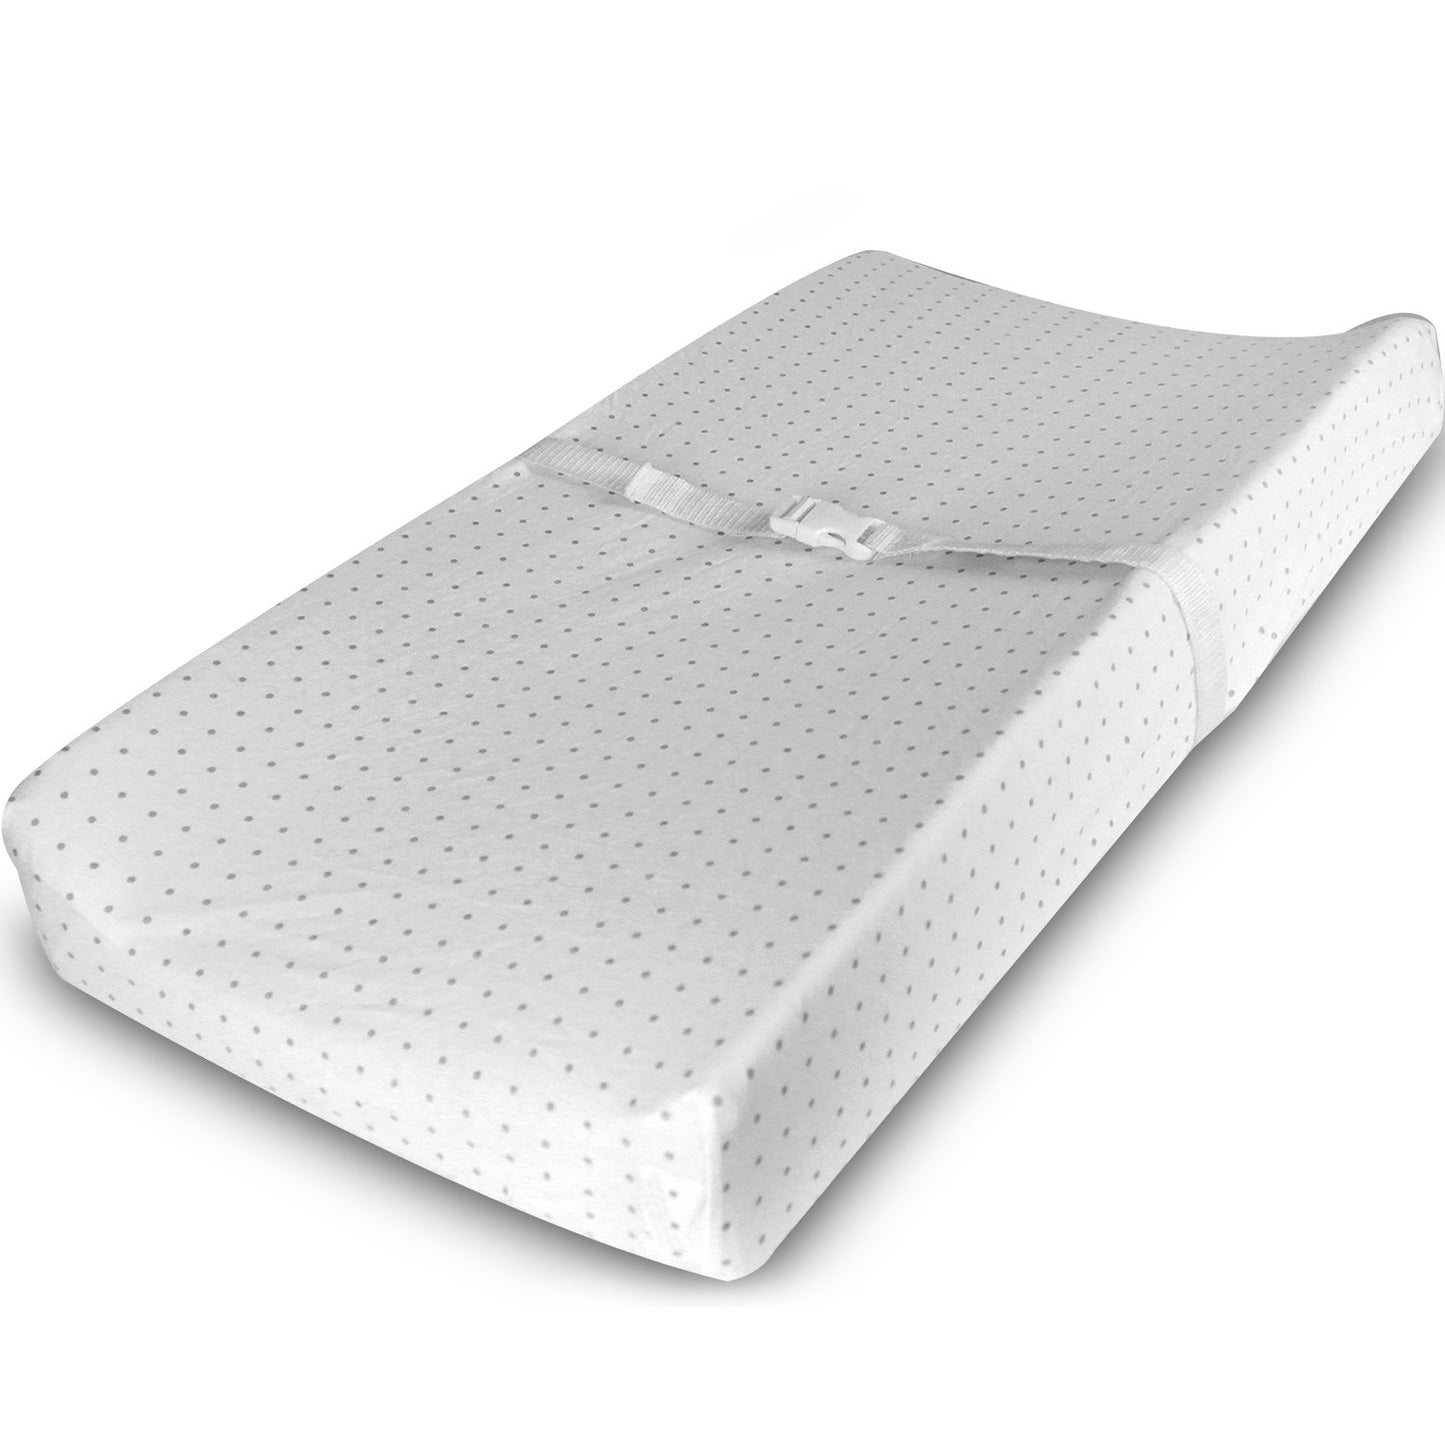 Changing Pad Cover Cradle Bassinet Sheets Fitted Jersey Cotton 2 Pack Grey/White